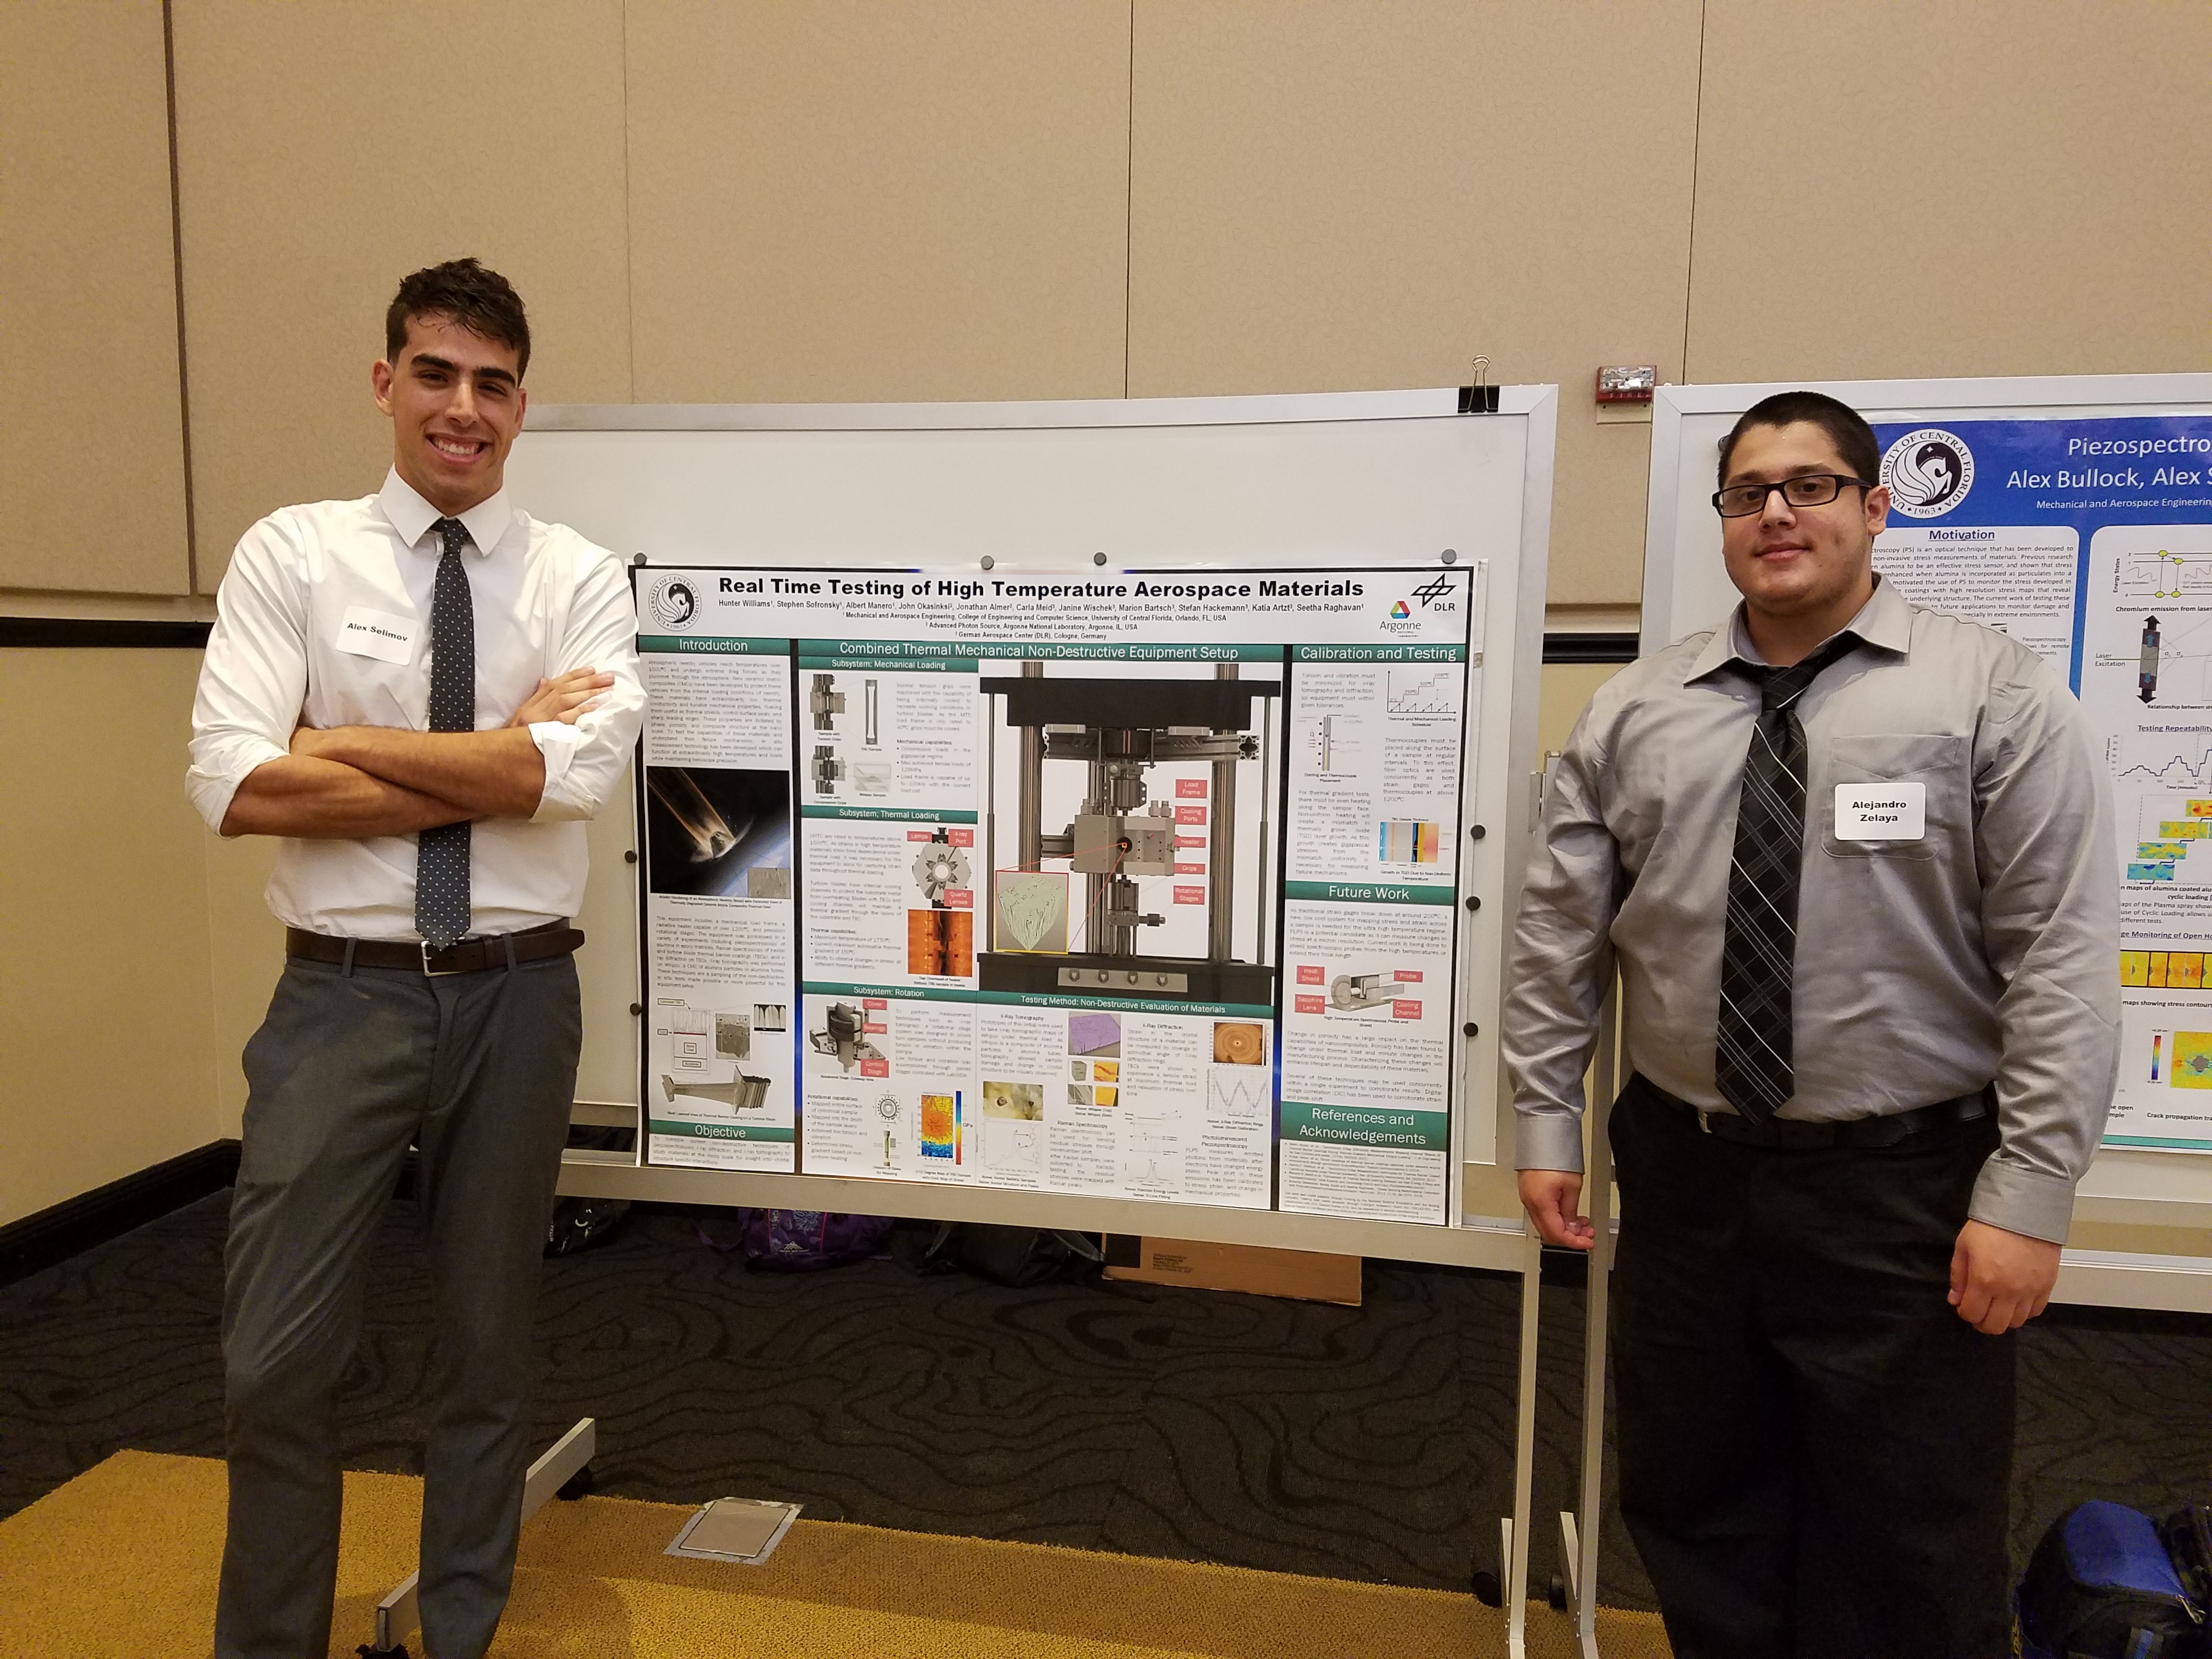 Alex Selimov and Alejandro Zelaya presenting poster on “Real Time Testing of High Temperature Aerospace Materials”